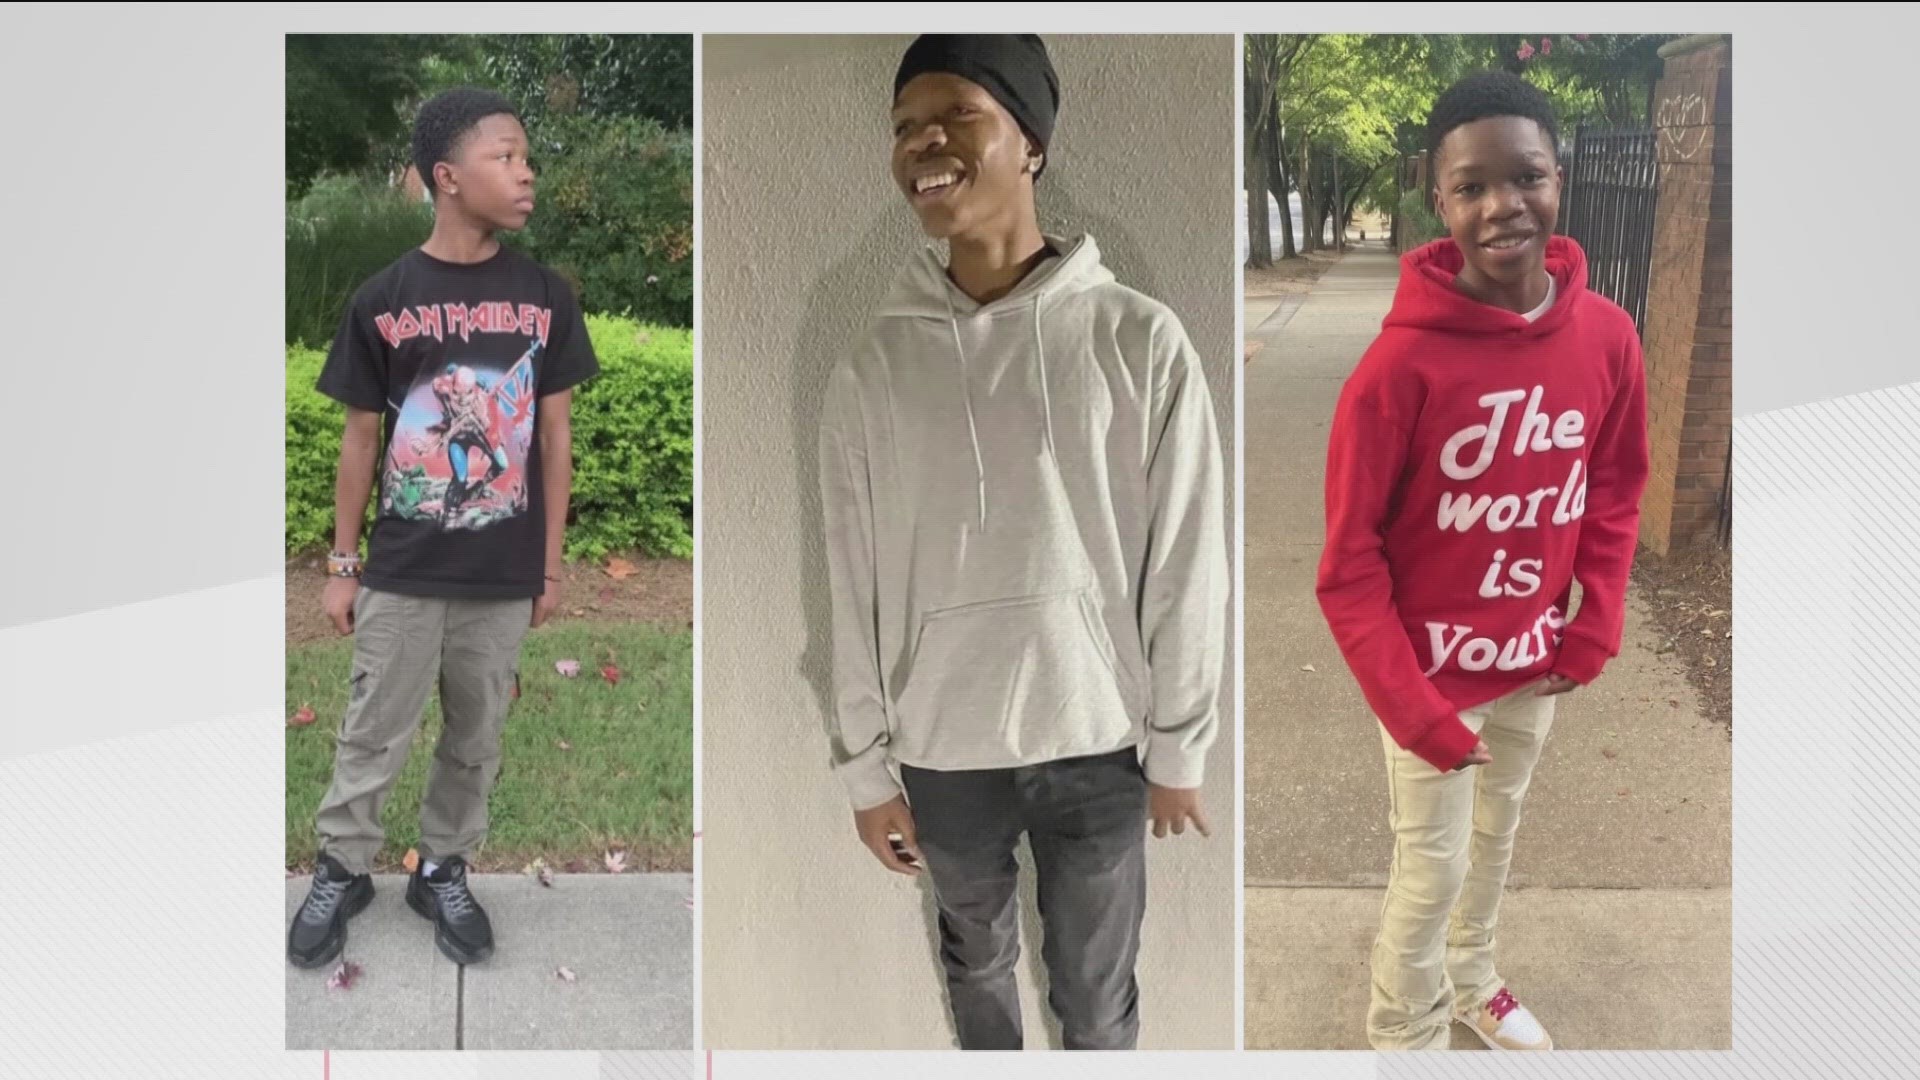 The mother of 15-year-old Mario Bailey, who was killed in February, said it was the first steps toward justice after a preliminary hearing on Tuesday.